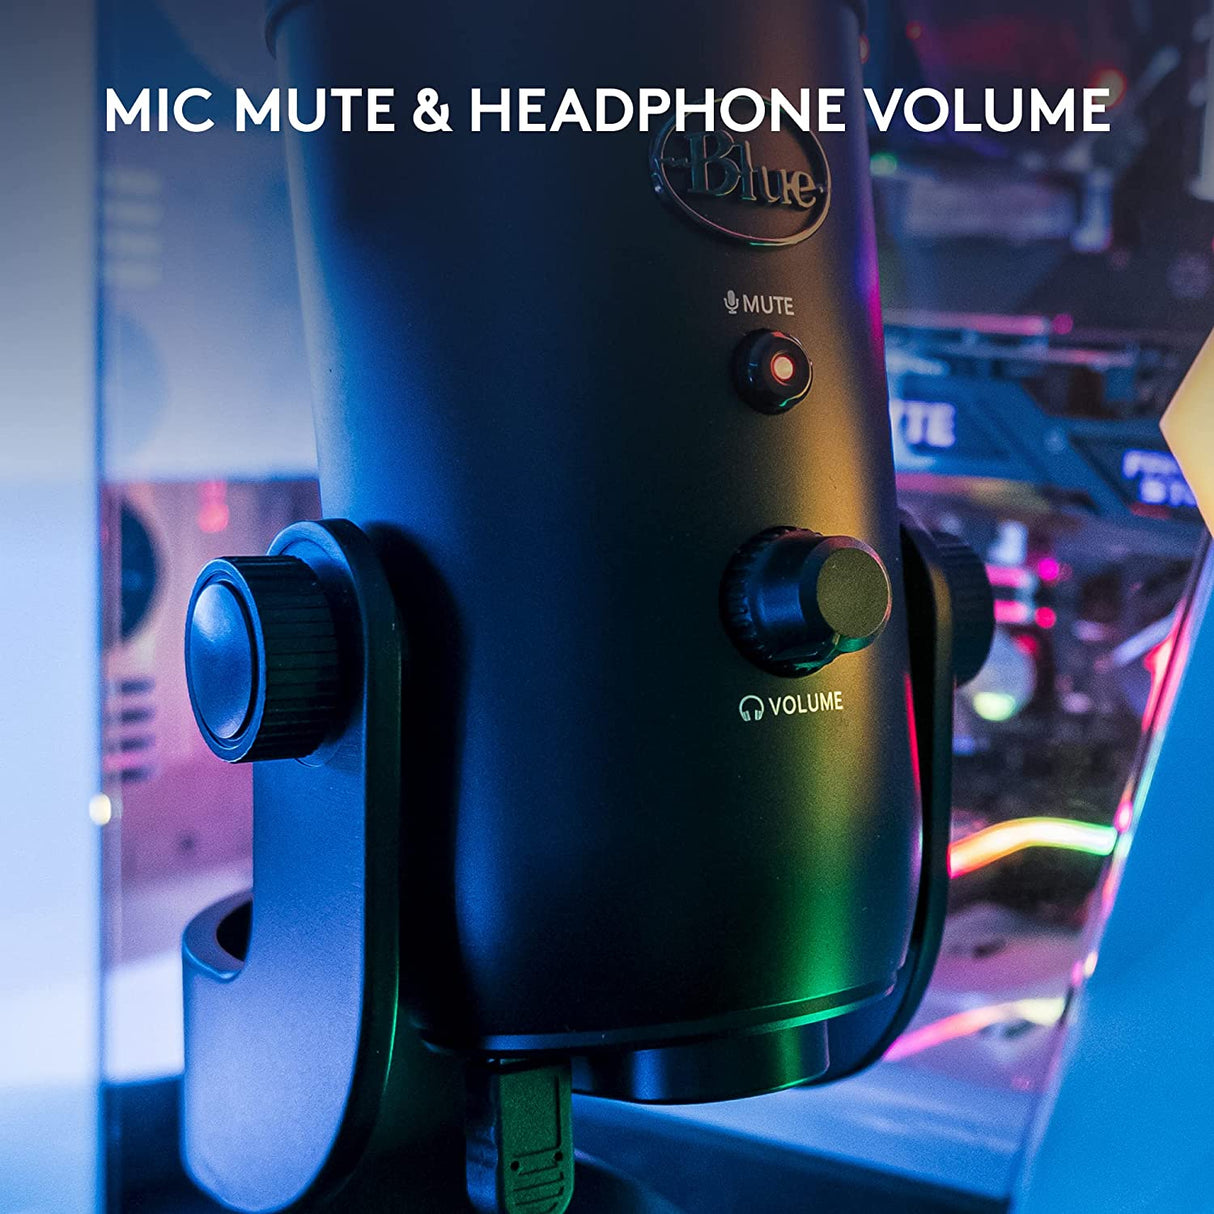 Logitech For Creators Blue Yeti Usb Microphone For Recording And